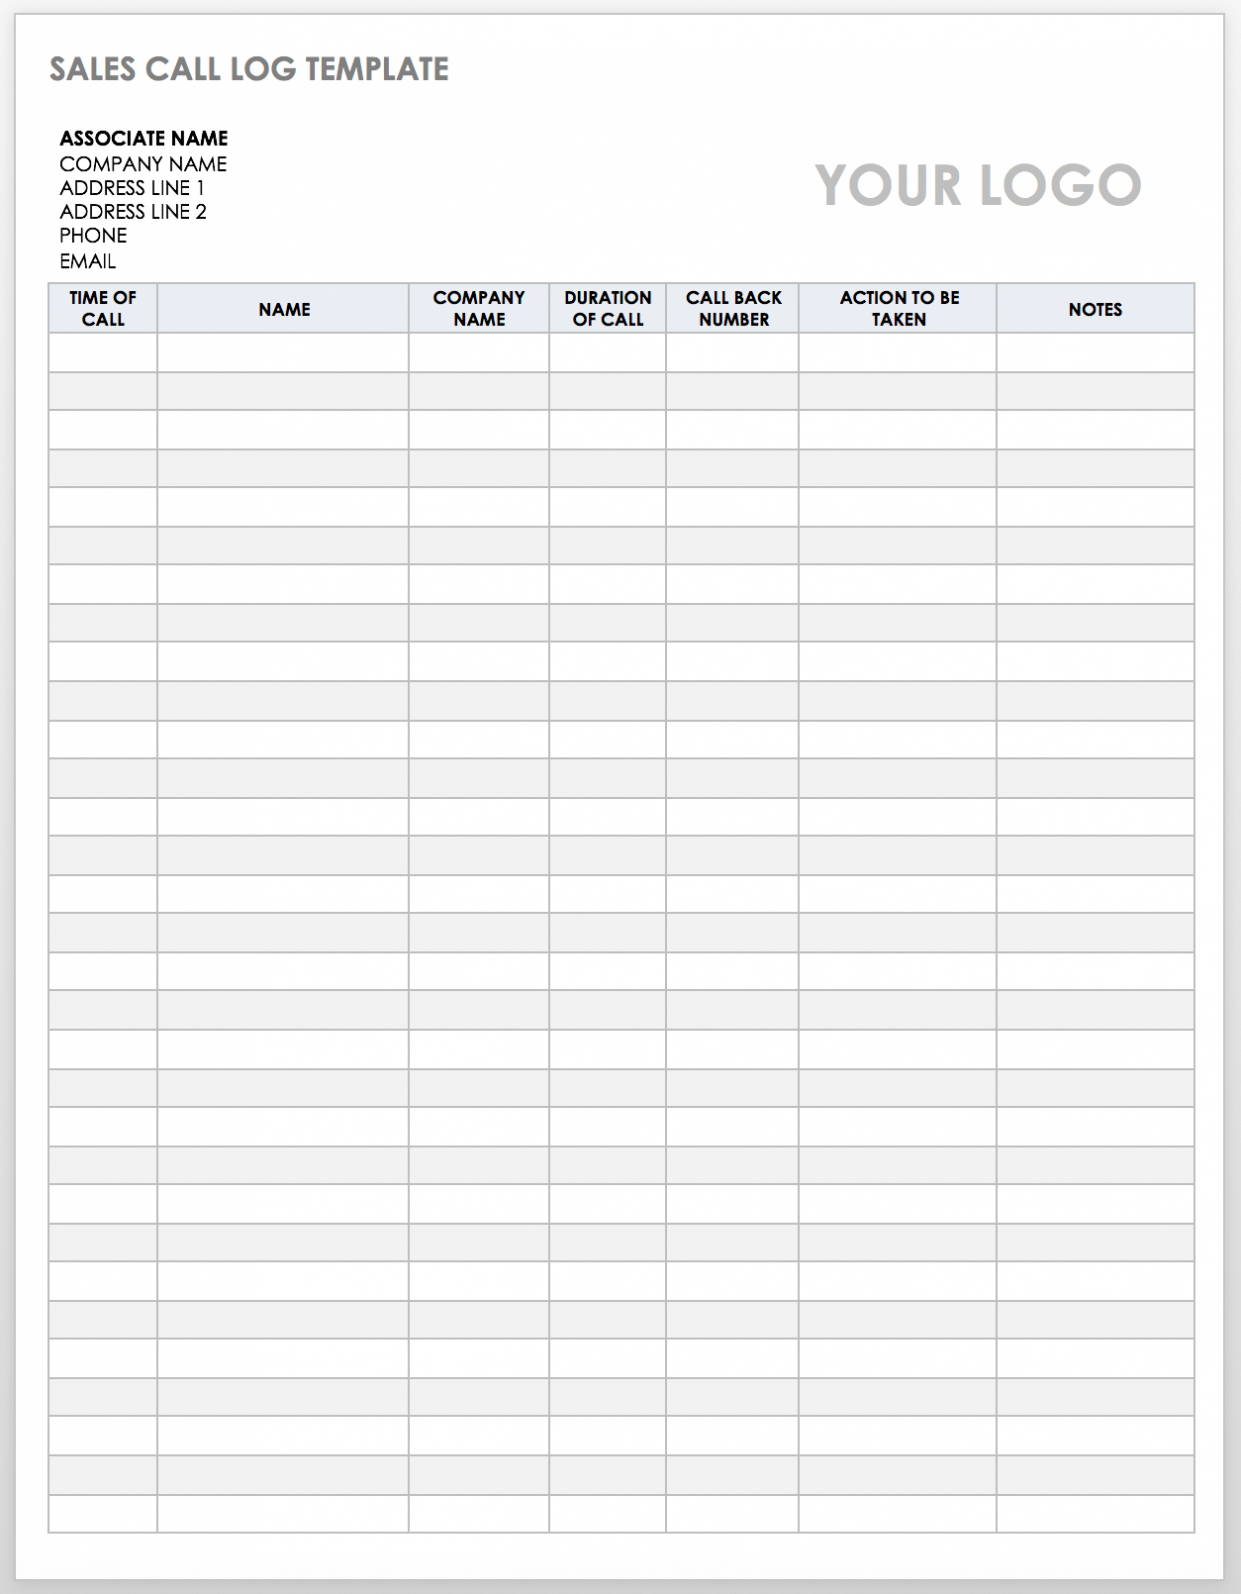 Free Client Call Log Templates | Smartsheet intended for Daily Sales Call Report Template Free Download